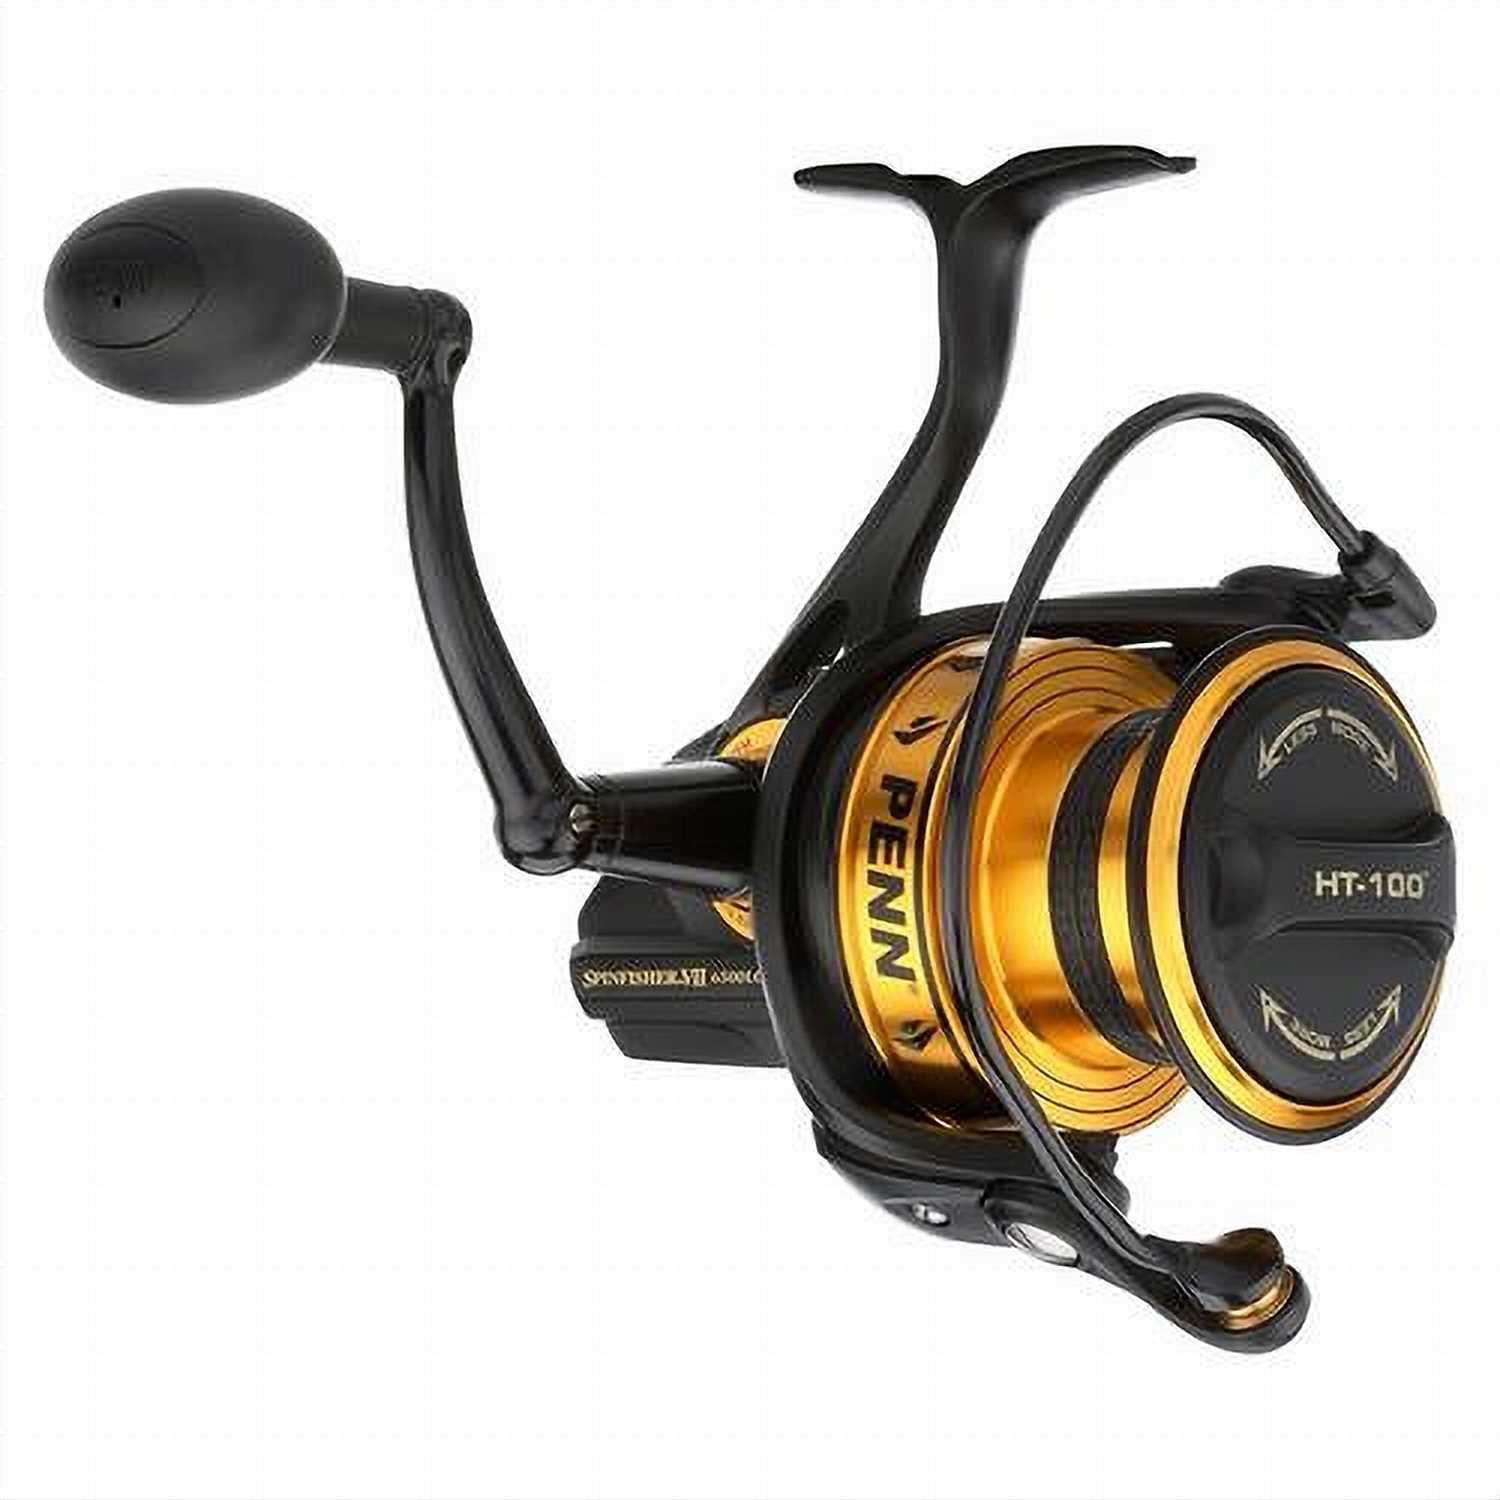 Surf Fisher Premium Long Cast Spinning Combo 8000 / 30lb Braid